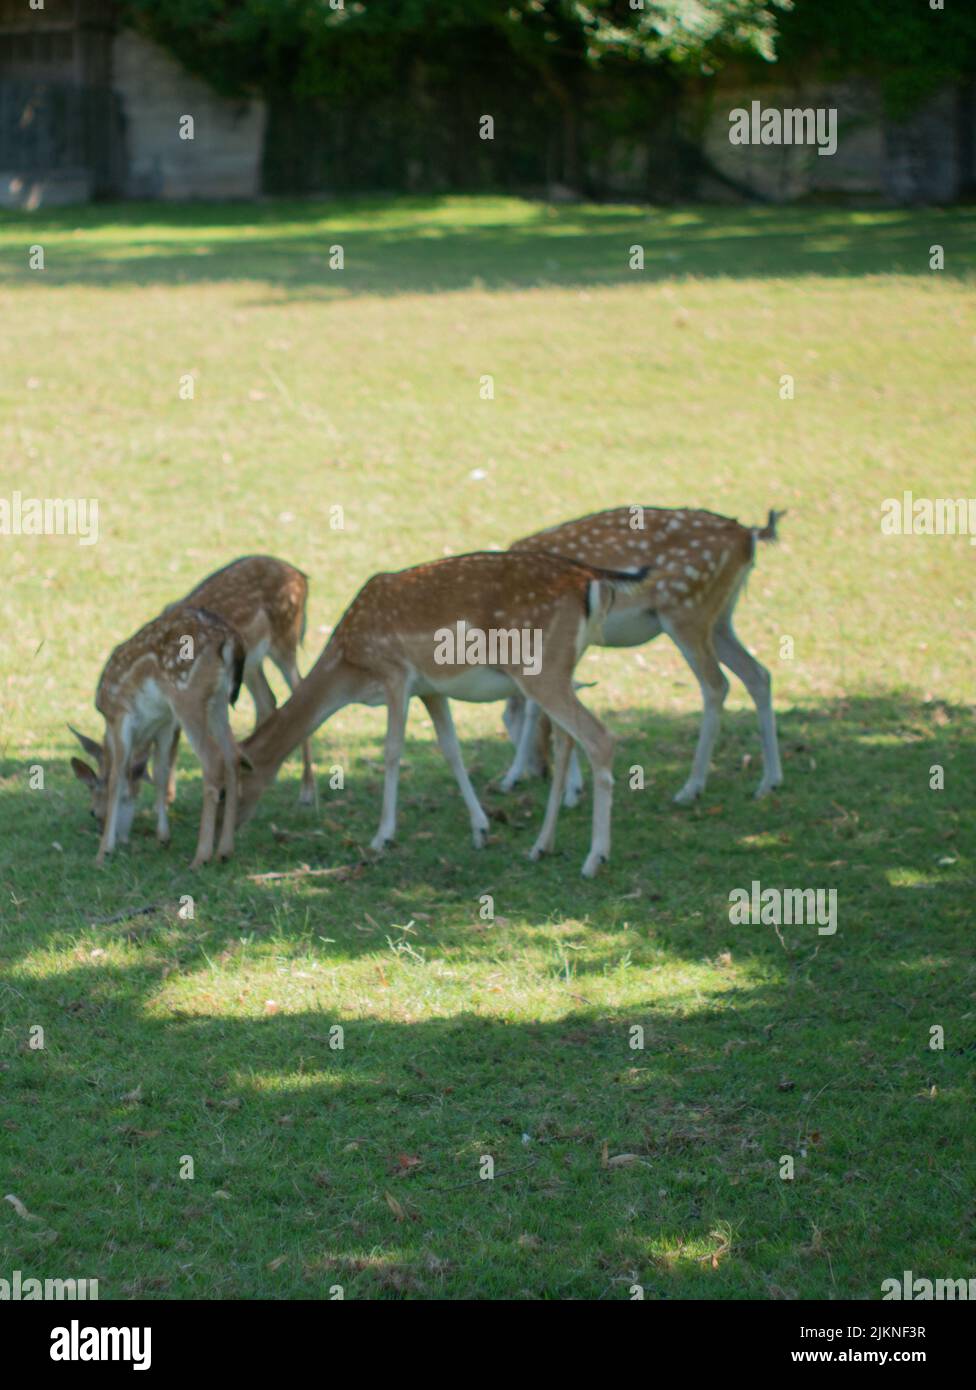 A closeup of a group of deers in a park Stock Photo